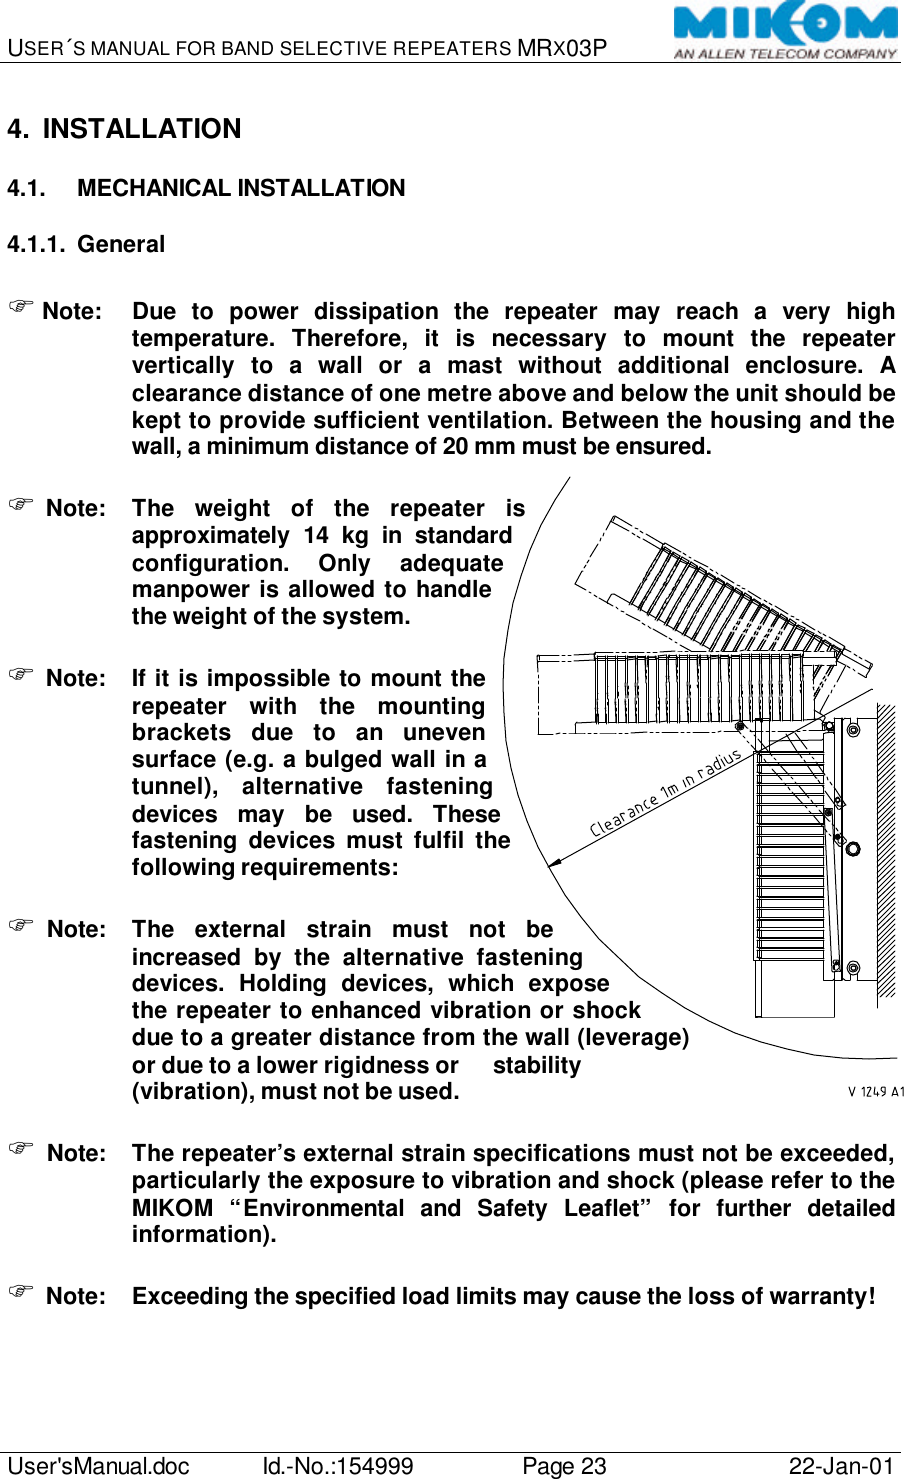 USER´S MANUAL FOR BAND SELECTIVE REPEATERS MRX03P   User&apos;sManual.doc Id.-No.:154999 Page 23 22-Jan-01  4. INSTALLATION 4.1. MECHANICAL INSTALLATION 4.1.1. General  F Note: Due to power dissipation the repeater may reach a very high temperature. Therefore, it is necessary to mount the repeater vertically to a wall or a mast without additional enclosure. A clearance distance of one metre above and below the unit should be kept to provide sufficient ventilation. Between the housing and the wall, a minimum distance of 20 mm must be ensured.  F Note: The weight of the repeater is approximately 14 kg in standard configuration. Only adequate manpower is allowed to handle the weight of the system.  F Note: If it is impossible to mount the repeater with the mounting brackets due to an uneven surface (e.g. a bulged wall in a tunnel), alternative fastening devices may be used. These fastening devices must fulfil the following requirements:  F Note: The external strain must not be increased by the alternative fastening devices. Holding devices, which expose the repeater to enhanced vibration or shock due to a greater distance from the wall (leverage) or due to a lower rigidness or  stability (vibration), must not be used.  F Note: The repeater’s external strain specifications must not be exceeded, particularly the exposure to vibration and shock (please refer to the MIKOM “Environmental and Safety Leaflet” for further detailed information).  F Note: Exceeding the specified load limits may cause the loss of warranty!  